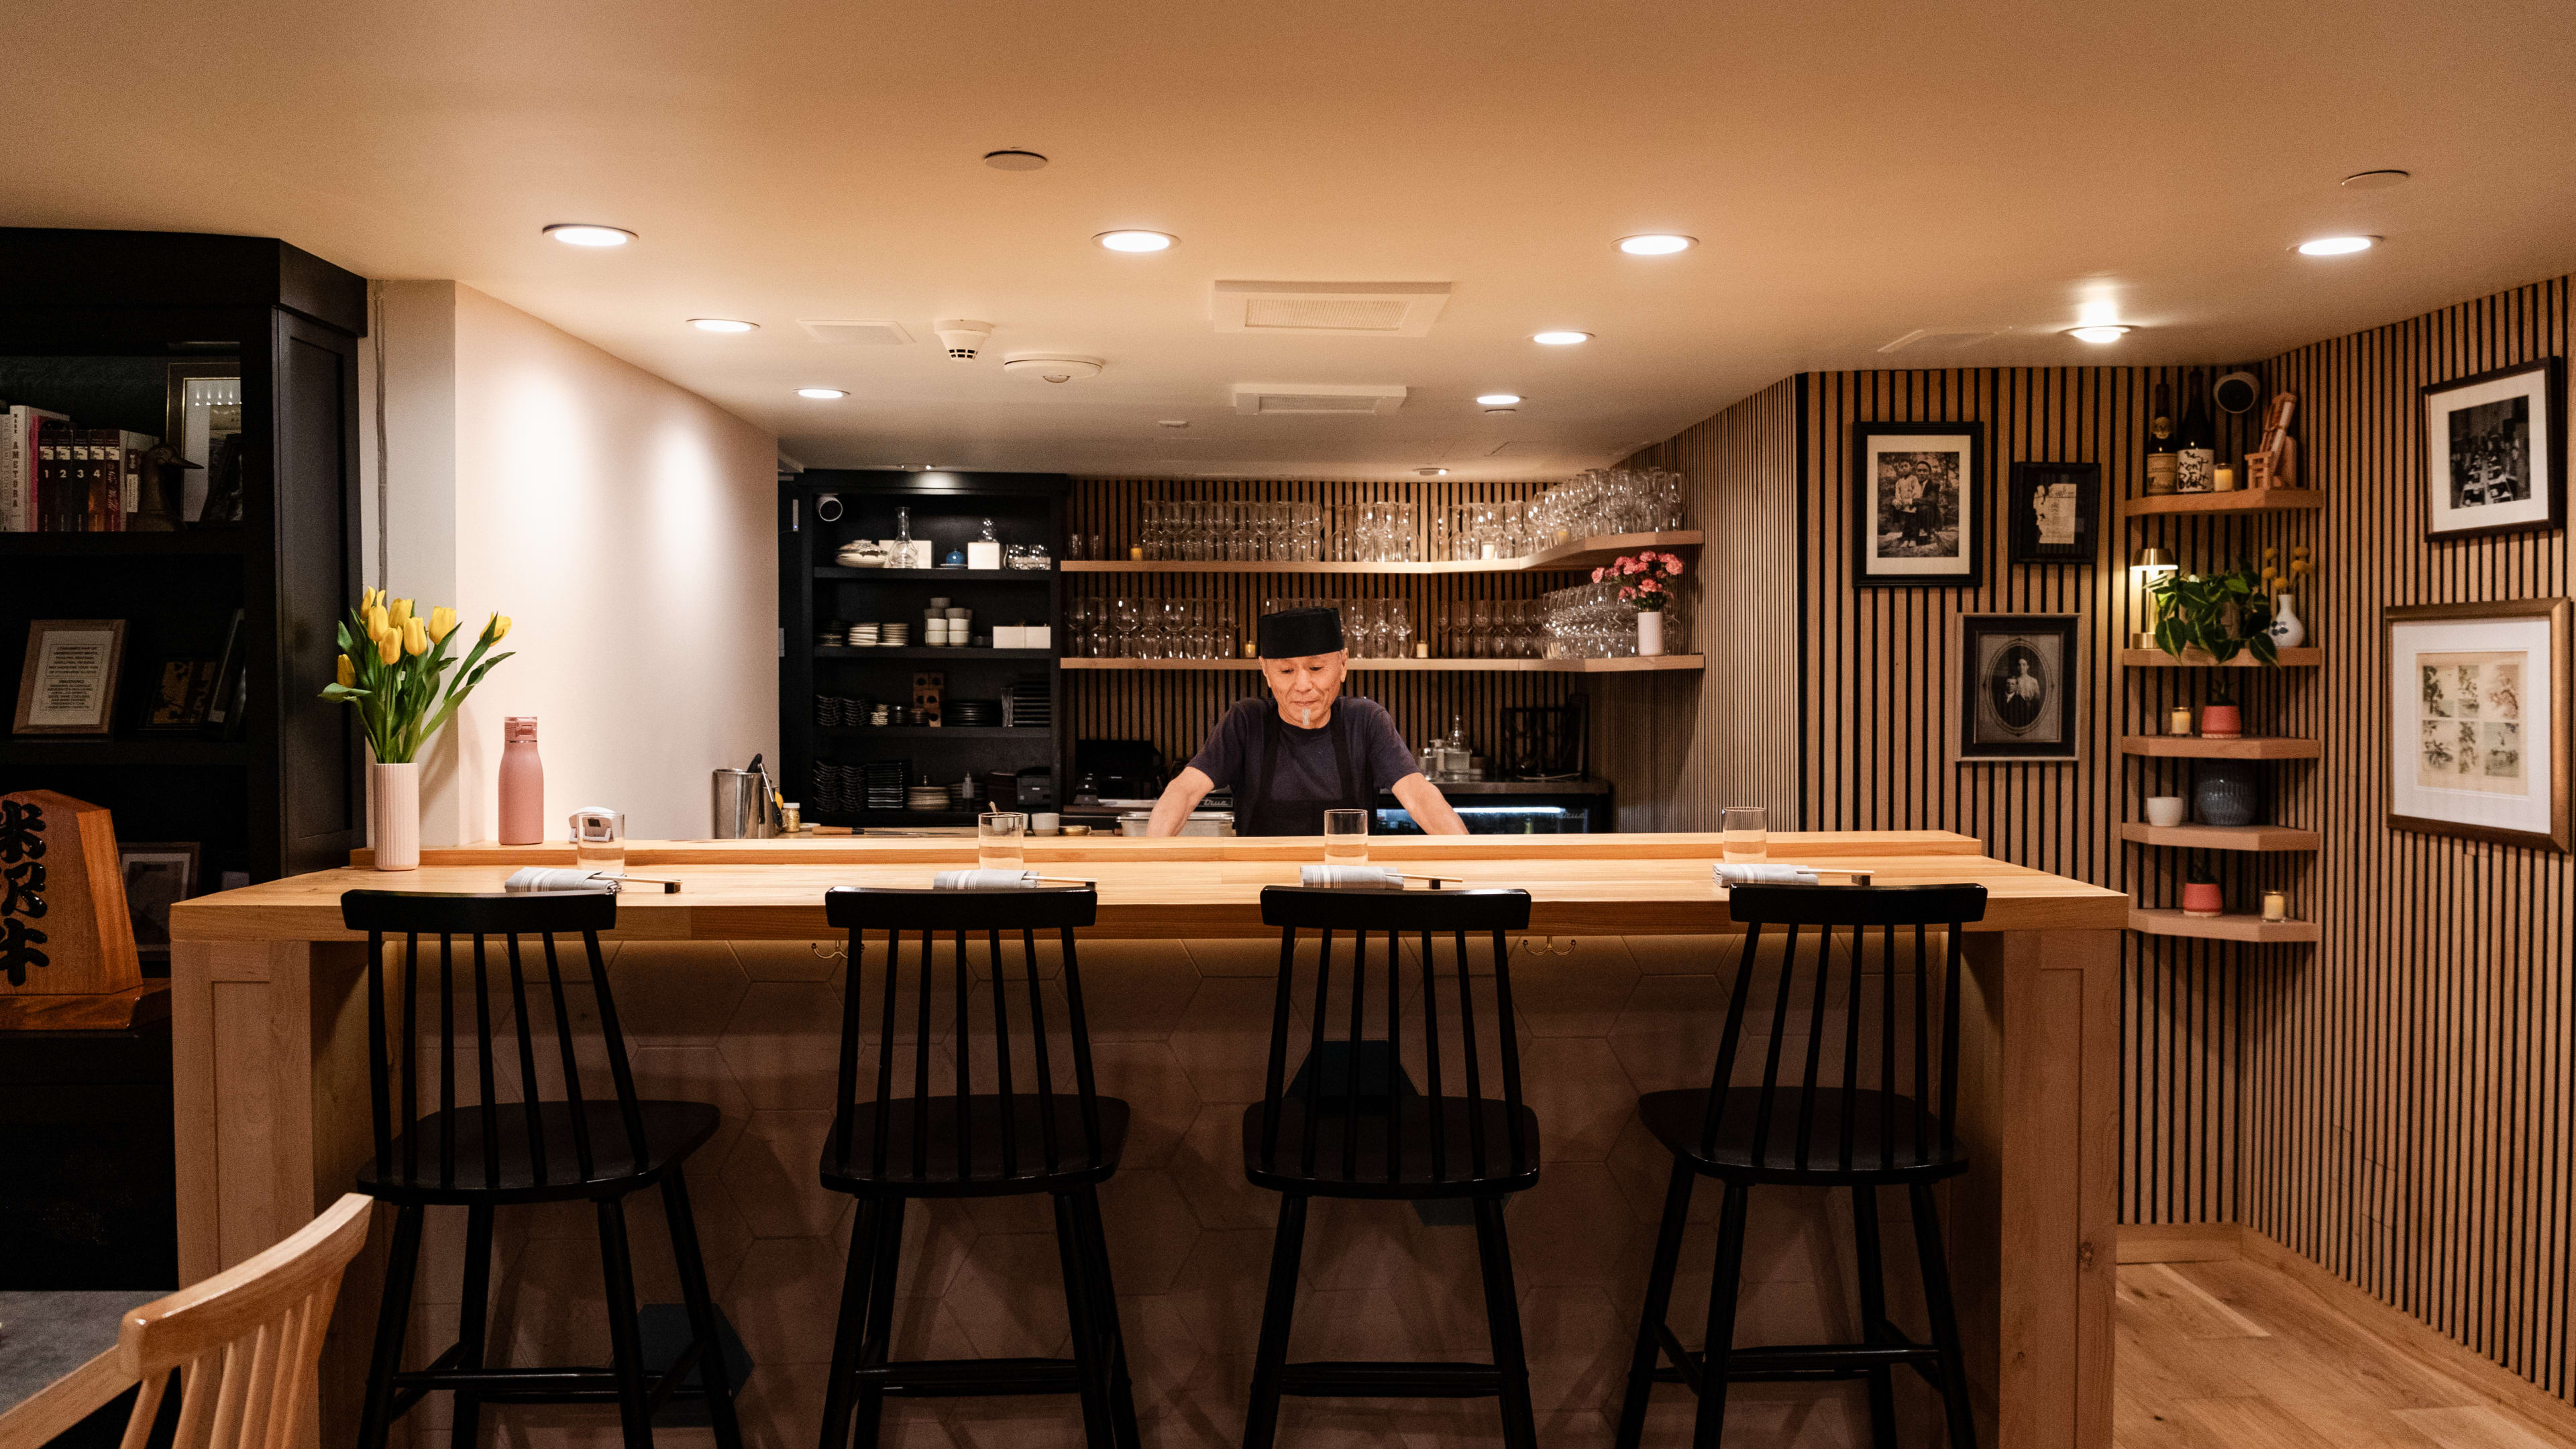 The four-seat sushi bar at Sushi Note Omakase. The sushi chef stands behind the bar.